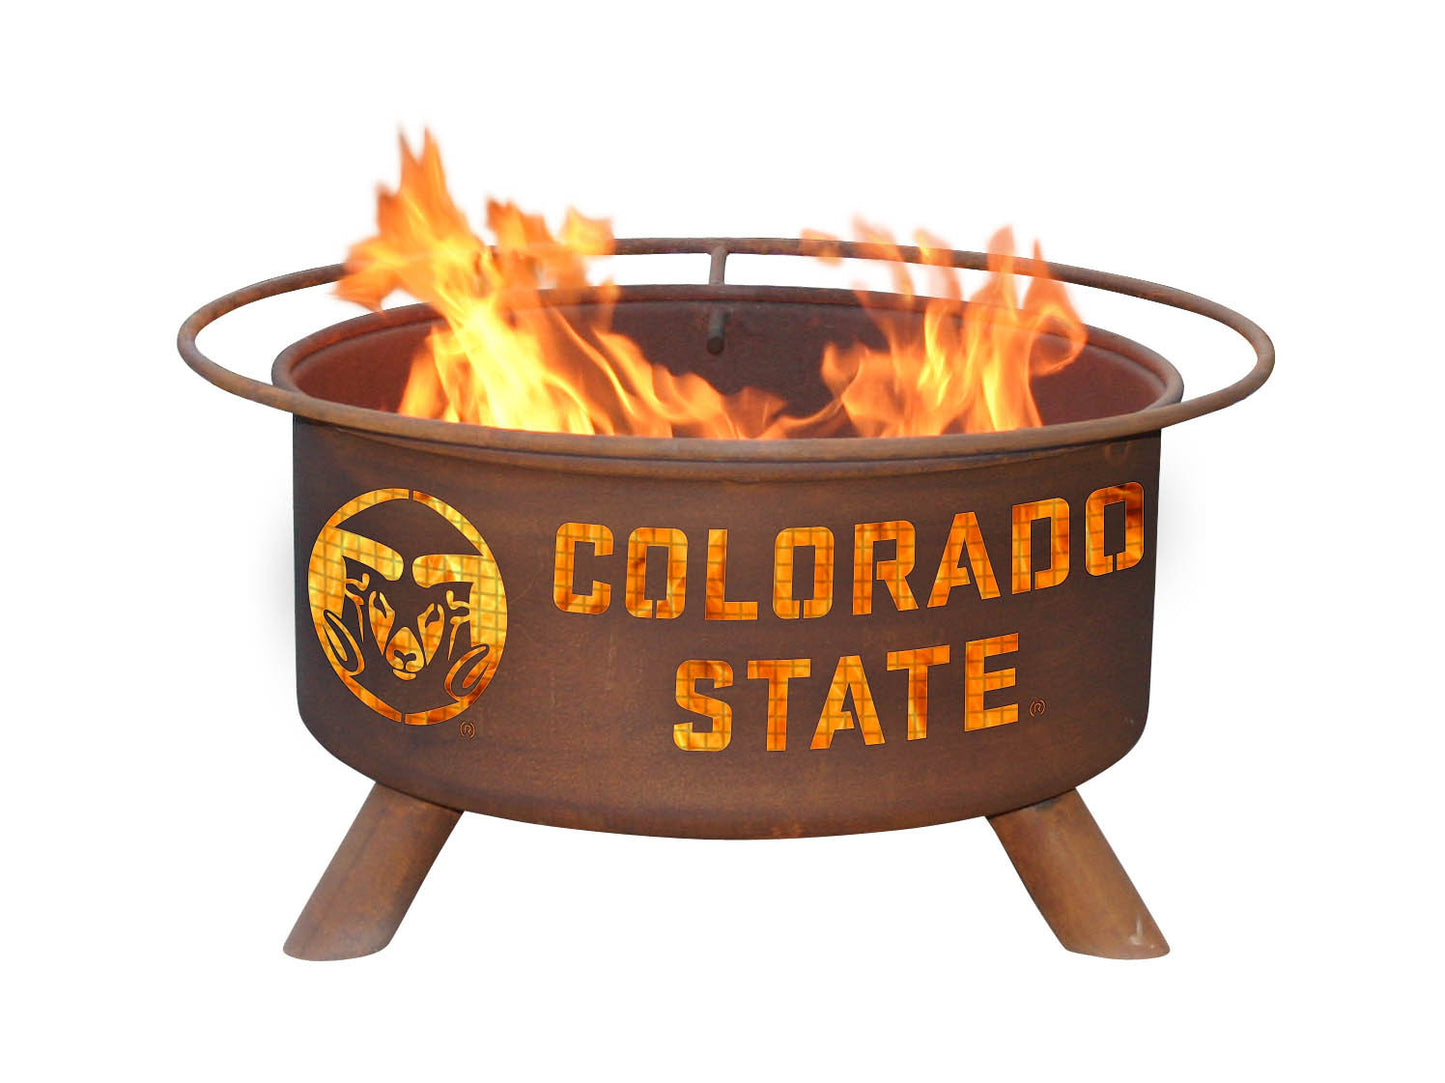 Collegiate Colorado State University Logo Wood and Charcoal Steel Fire Pit, Fireplace - Yardify.com